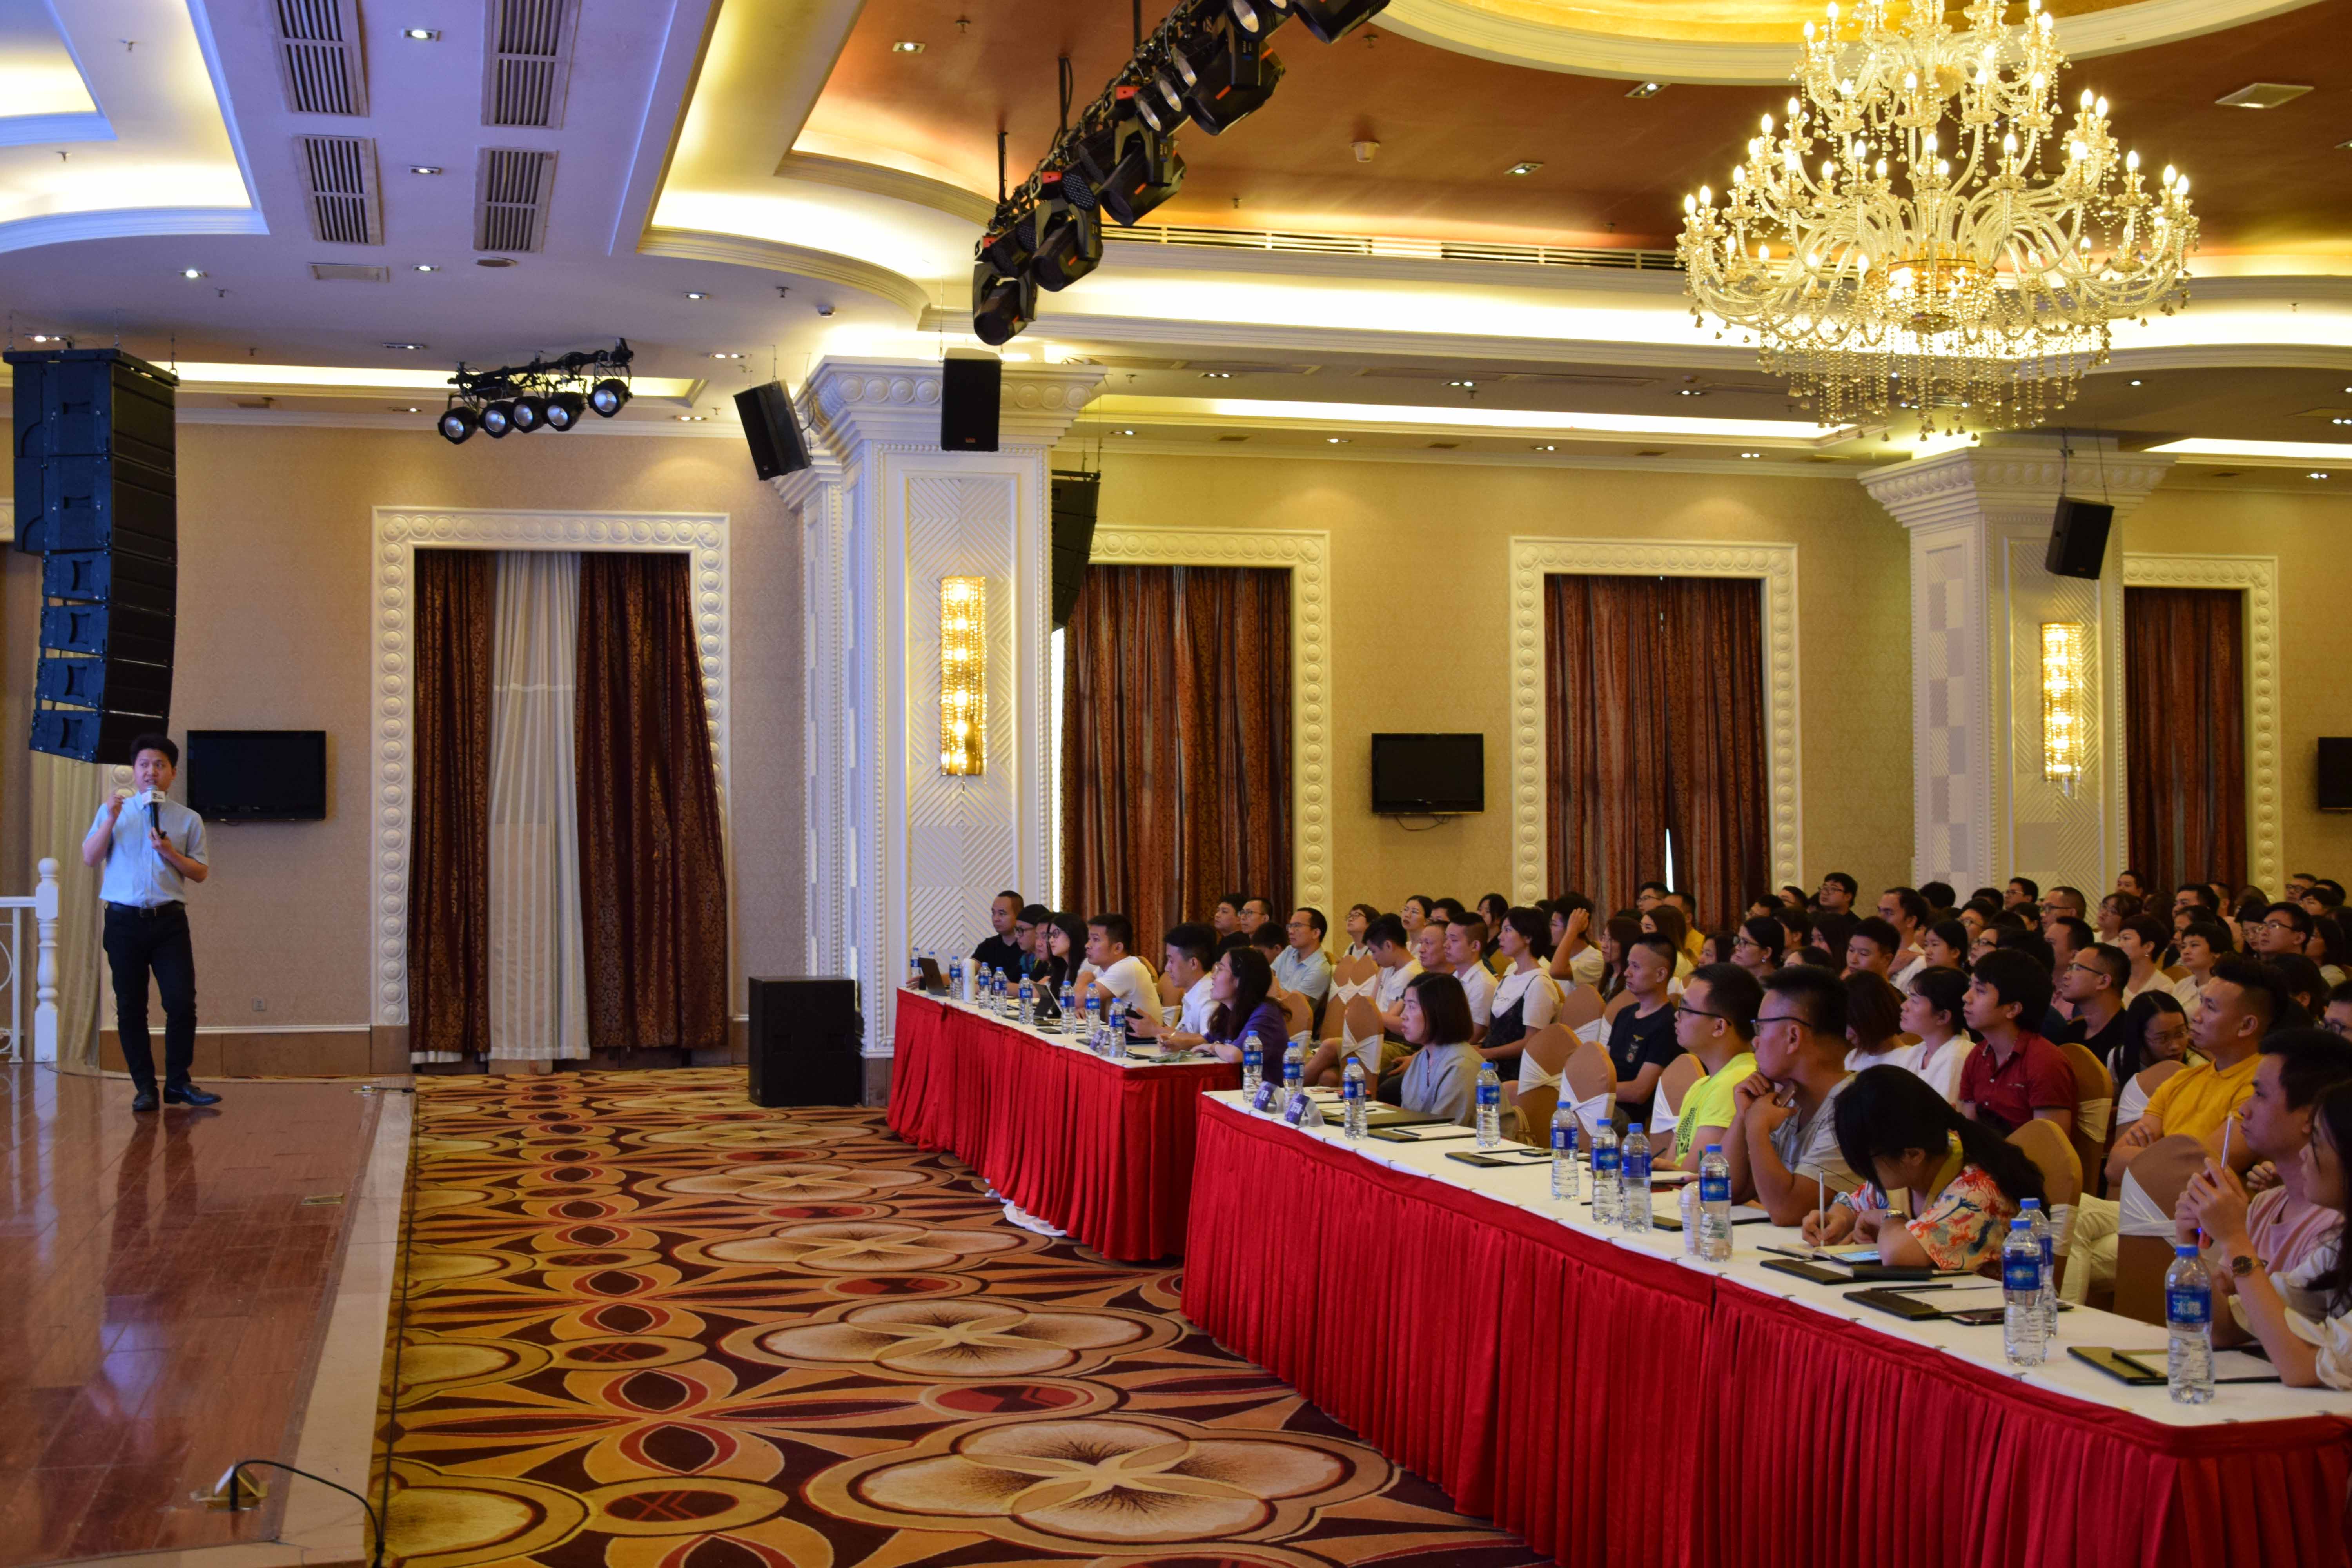 Jheyewear CEO was Invited to Attend a Training Sharing the Secrets of Success in Alibaba